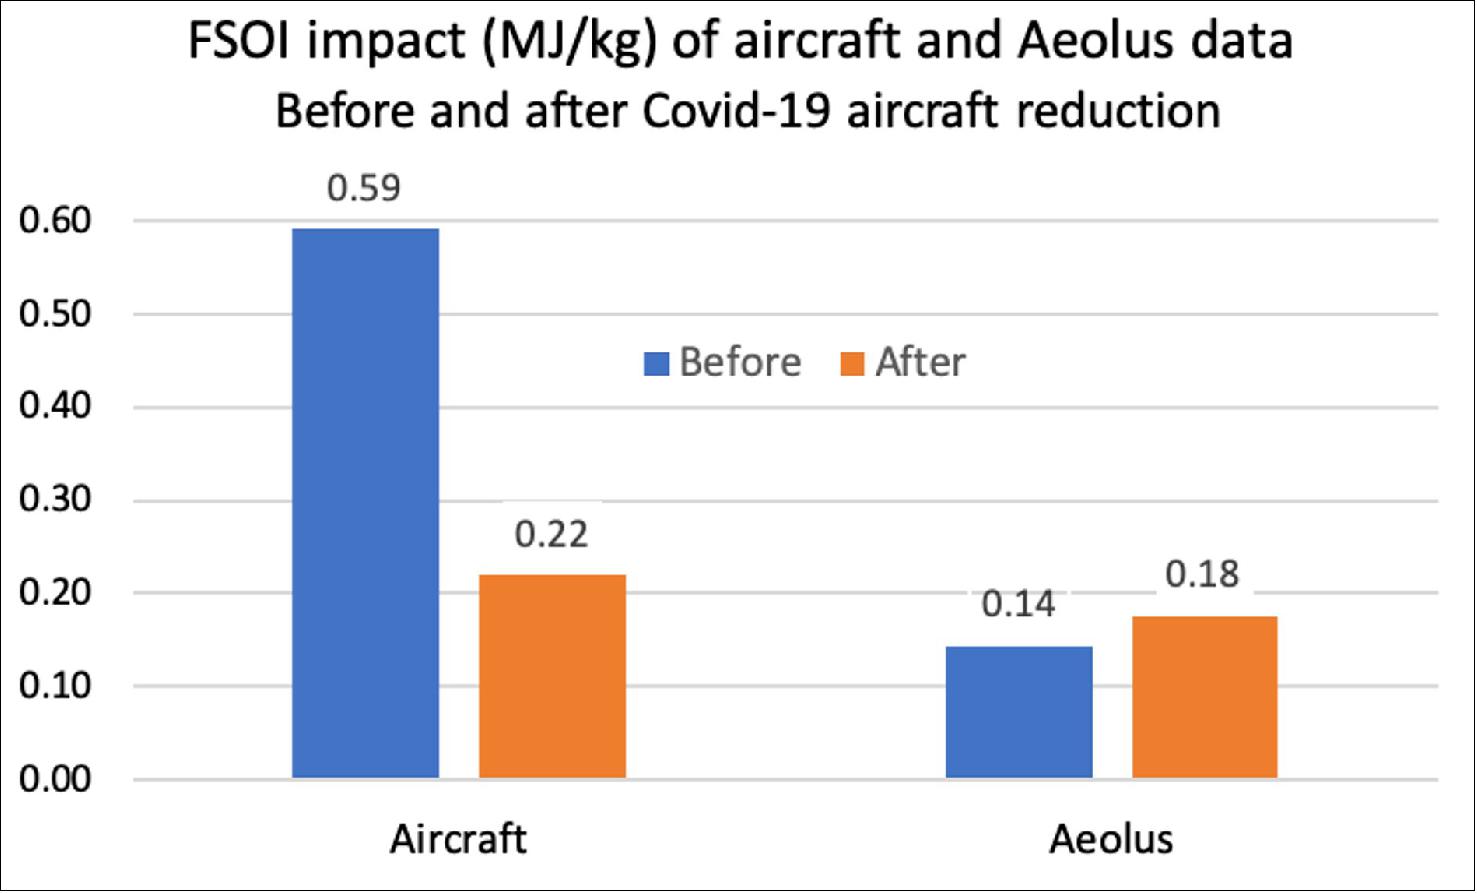 Figure 24: Impact of aircraft and Aeolus data in ECMWF forecasts before and after the COVID-19-related reduction in air traffic. Forecast Sensitivity to Observation Influence (FSOI) measures how various observing systems influence the ECMWF numerical weather forecast quality. The figure shows the total impact [Mega J/kg] of aircraft data and Aeolus data for two weeks before and after the reduction in aircraft data owing to COVID-19. The impact of Aeolus has increased by 23% (image credit: ECMWF)